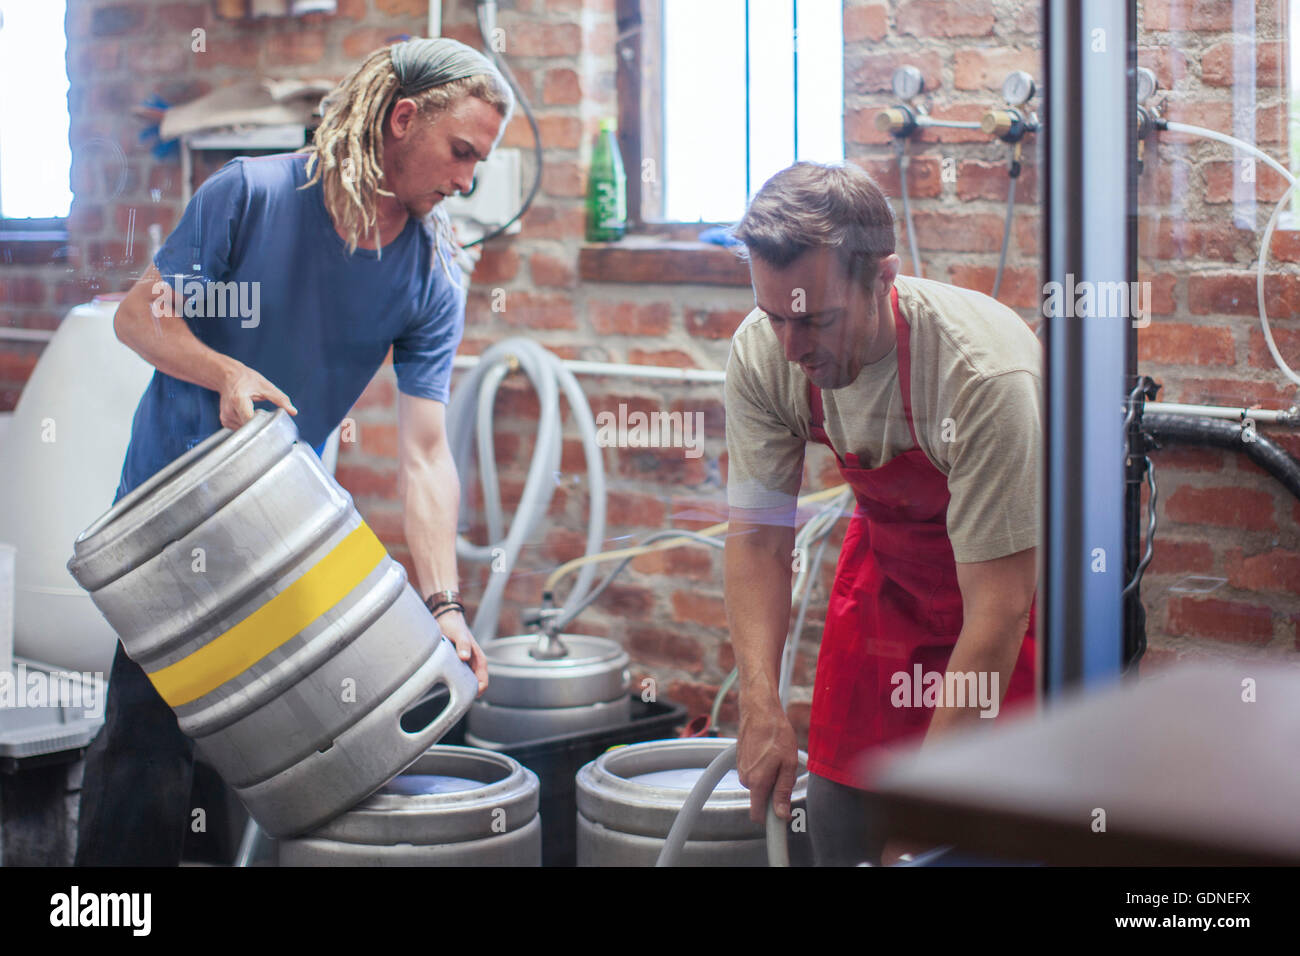 Colleagues in microbrewery cleaning beer kegs Stock Photo